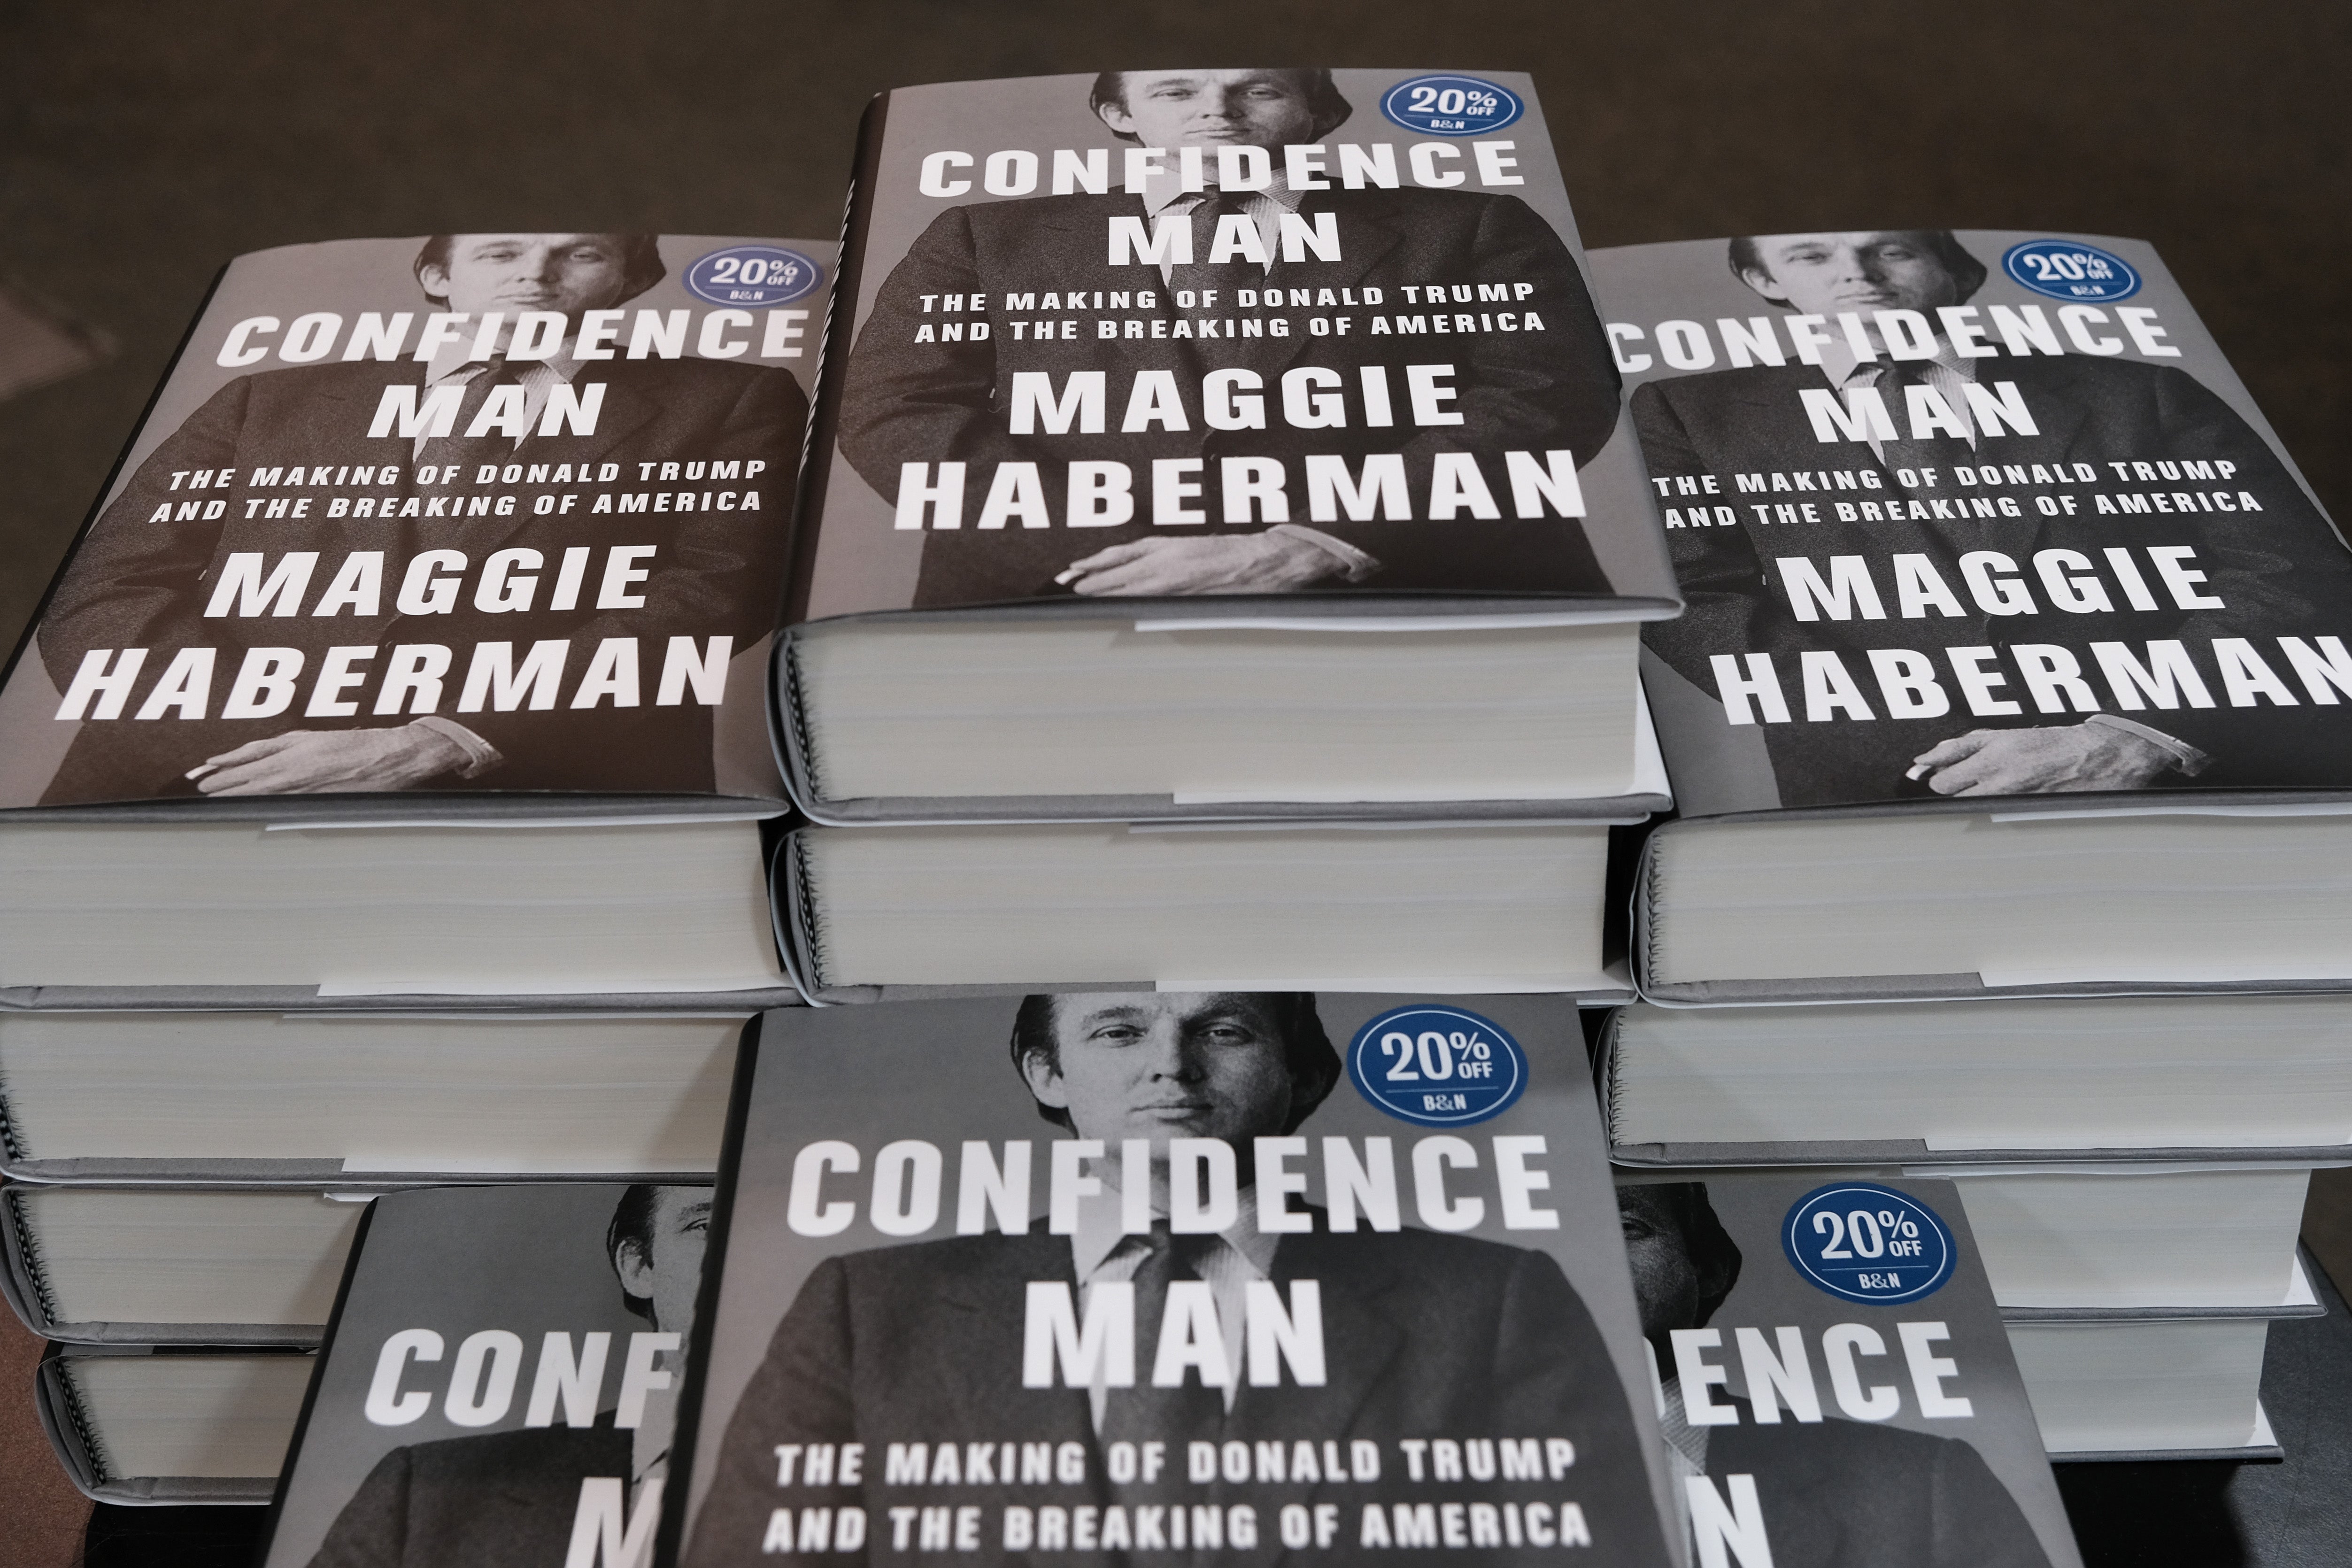 Copies of Confidence Man by New York Times journalist Maggie Haberman